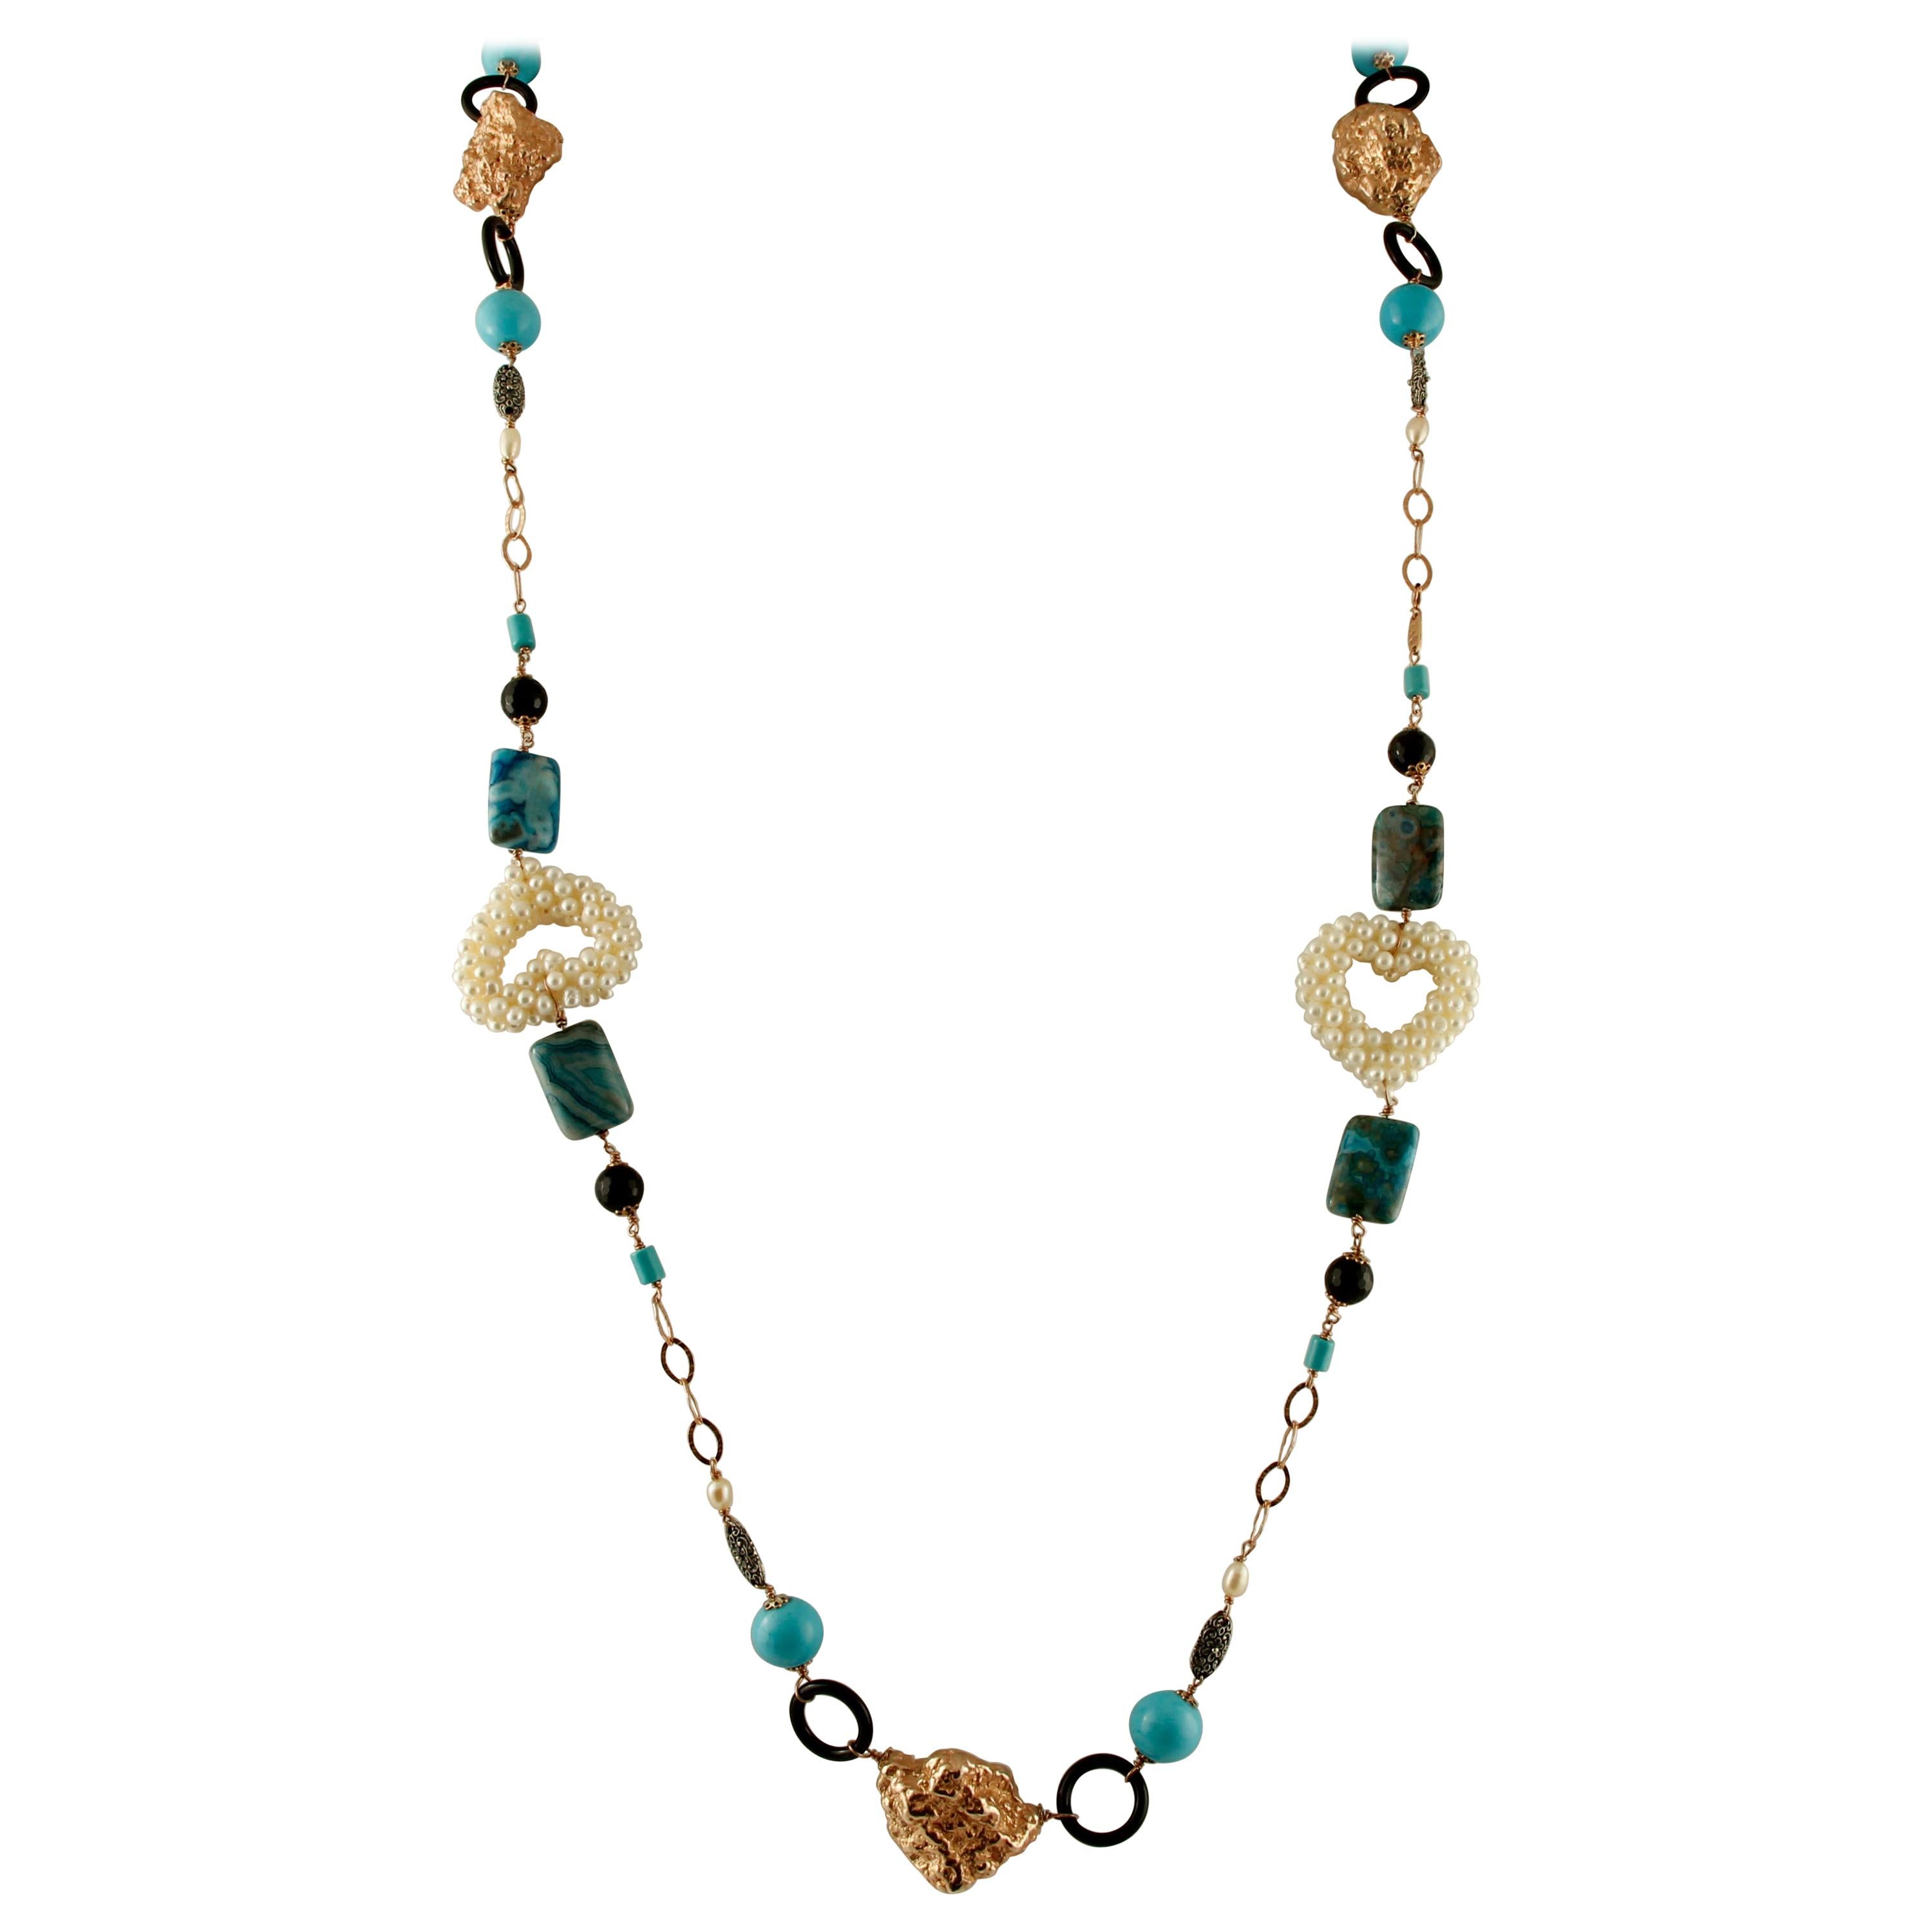 Turquoise, Rock Crystal, Pearls, Calcedony 9 Karat Gold and Silver Long Necklace